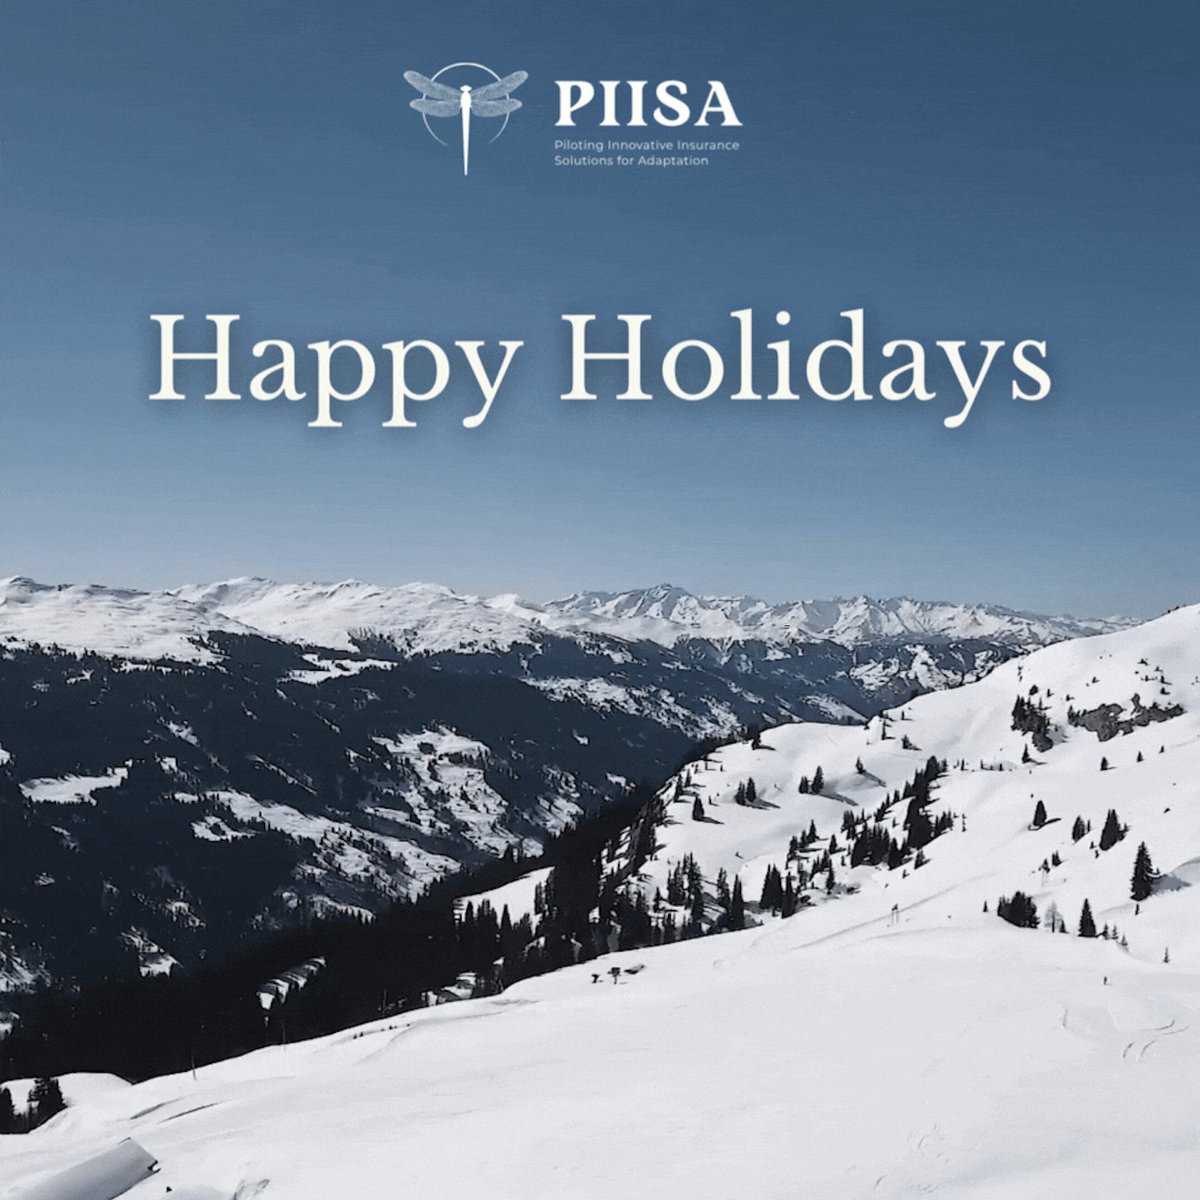 Season’s greetings and best wishes for a happy, healthy, and joyous holiday season! 
#PIISAProject #ClimateInsurance #ClimateServices  #ClimateAdaptation